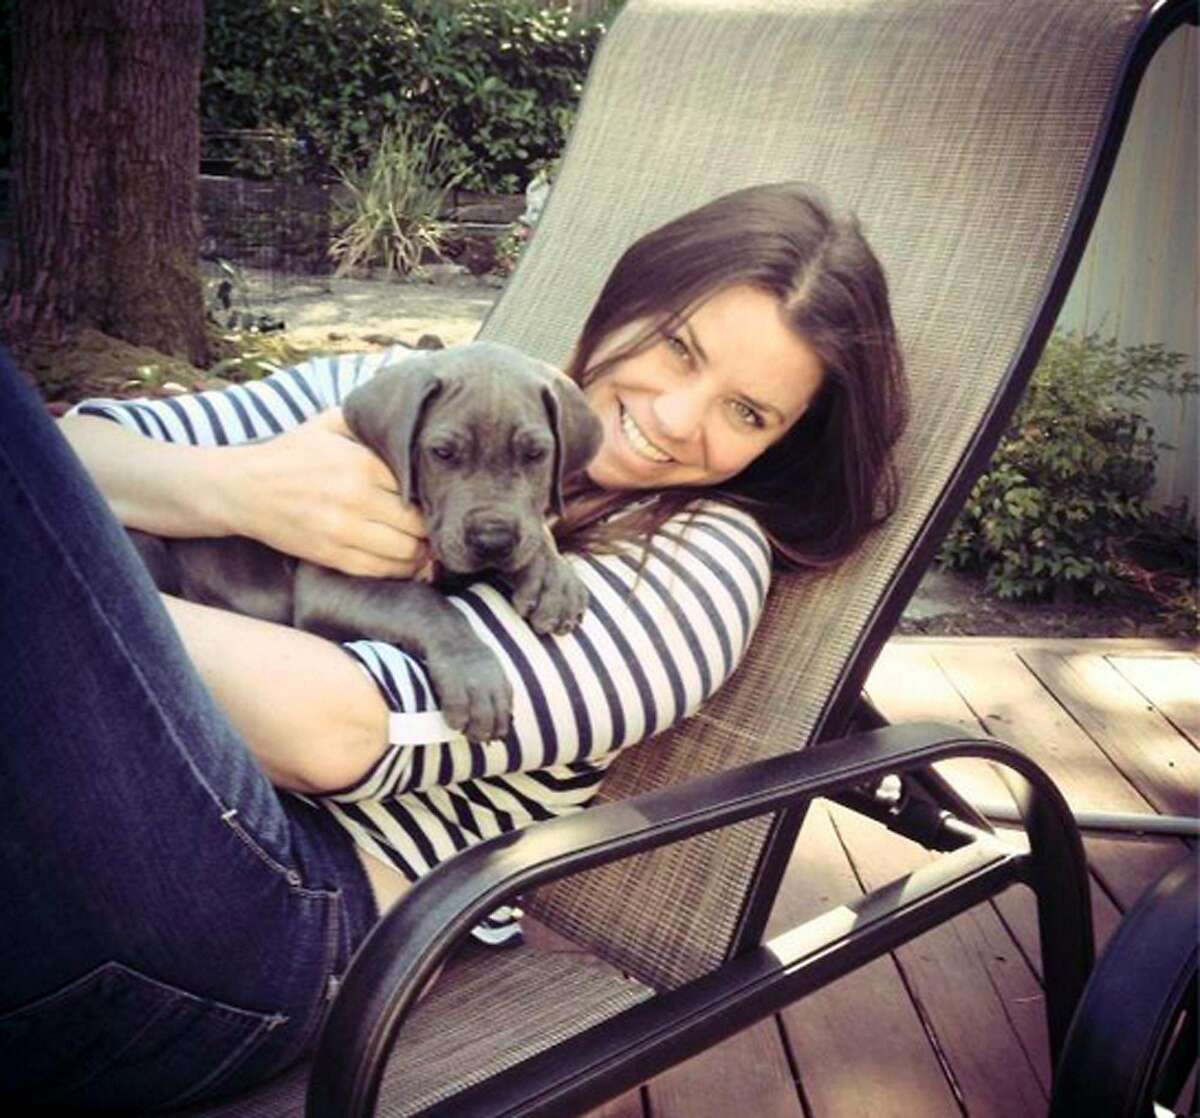 This undated photo provided by the Maynard family shows Brittany Maynard. The terminally ill California woman moved to Portland, Ore., to take advantage of Oregon's Death with Dignity Act, which was established in the 1990s. Maynard wants to pass a similar law in California and has turned to advocacy in her final days. (AP Photo/Maynard Family)